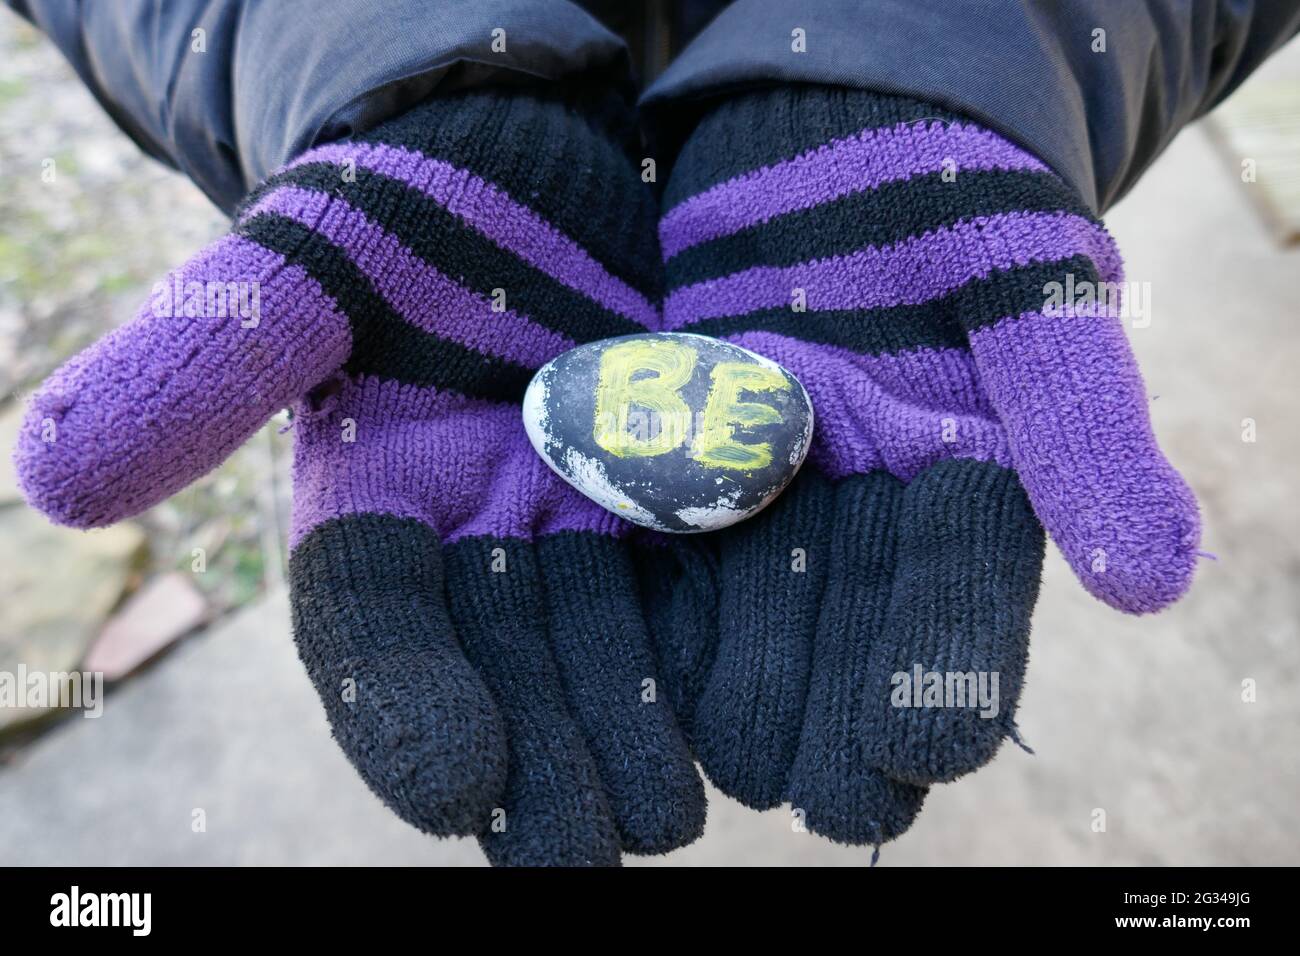 Person wearing black and purple gloves holding up kindness rock with BE message Stock Photo